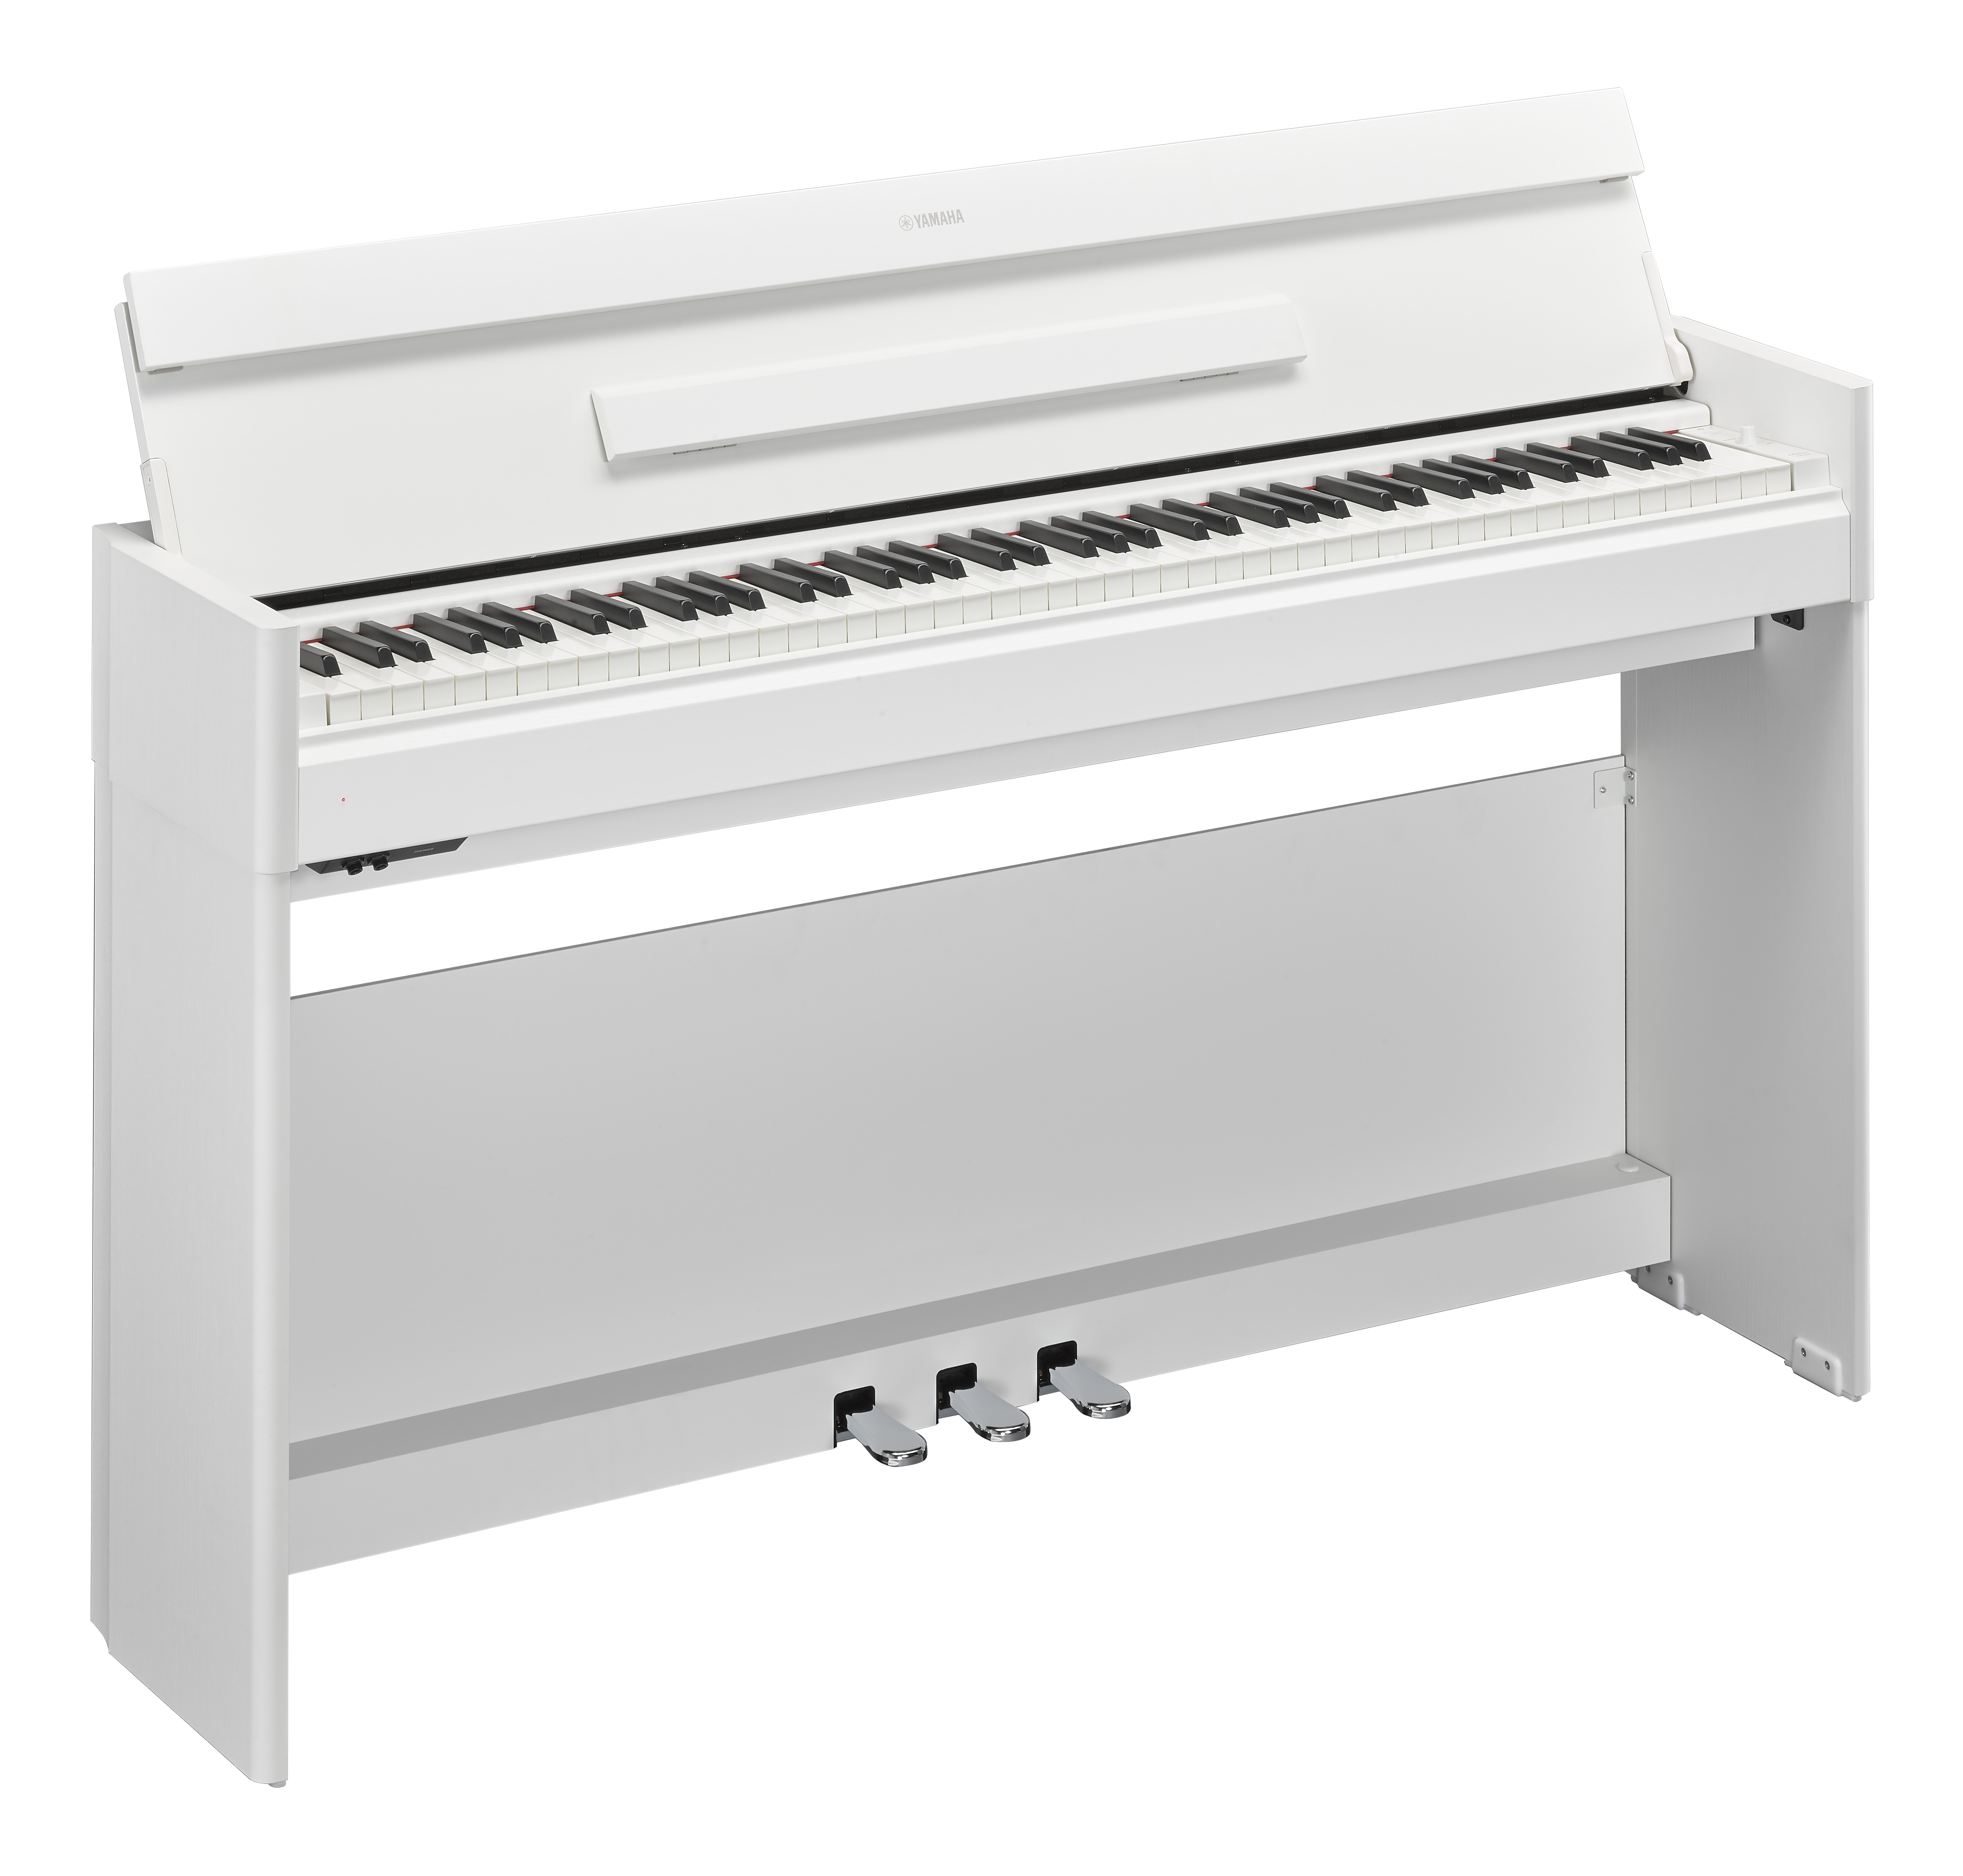 Yamaha Ydp-s54 - White - Digital piano with stand - Variation 1